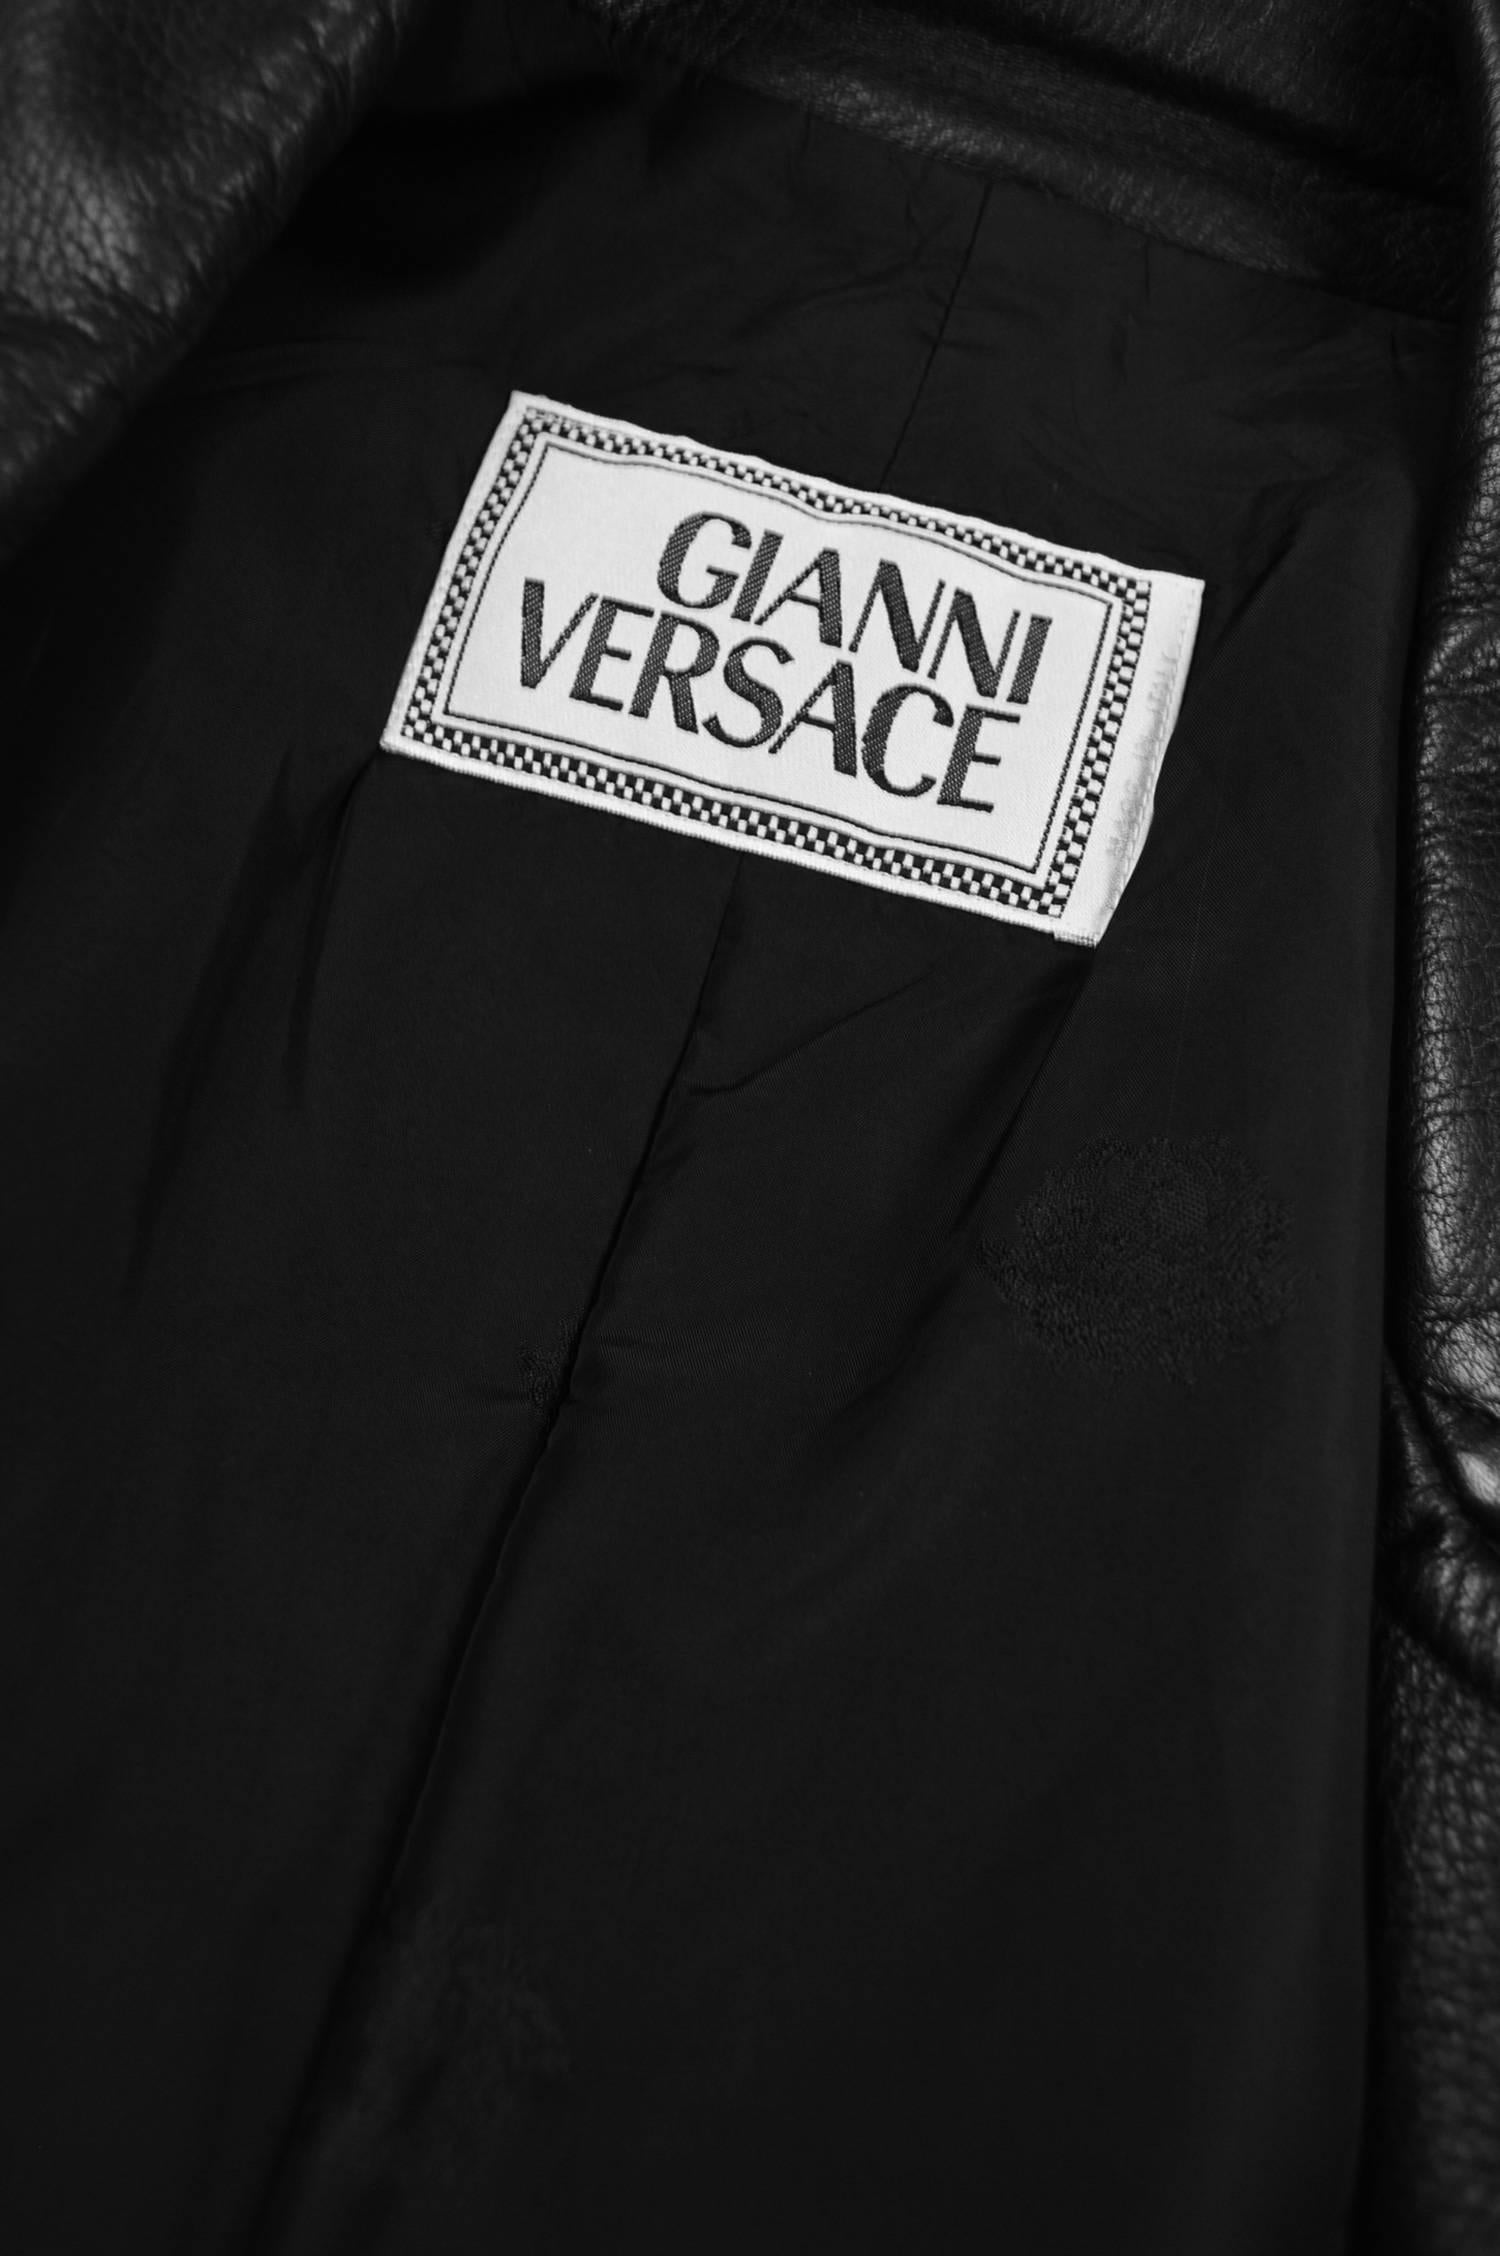 Gianni Versace Men's Black Leather Double Breasted Jacket, A/W 2002  For Sale 7